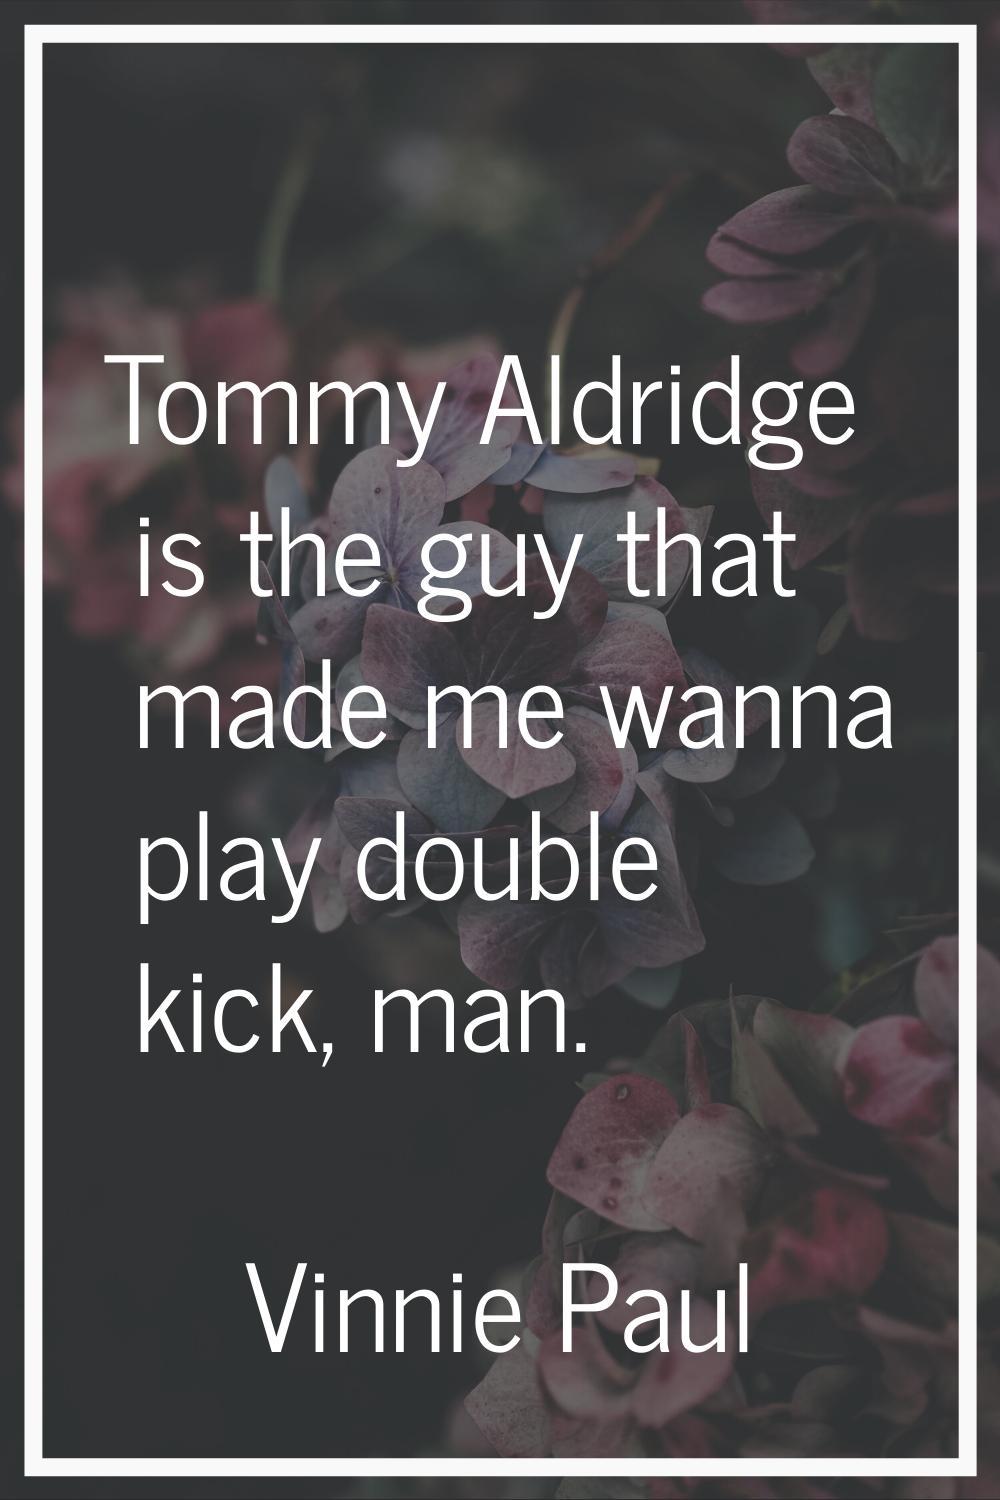 Tommy Aldridge is the guy that made me wanna play double kick, man.